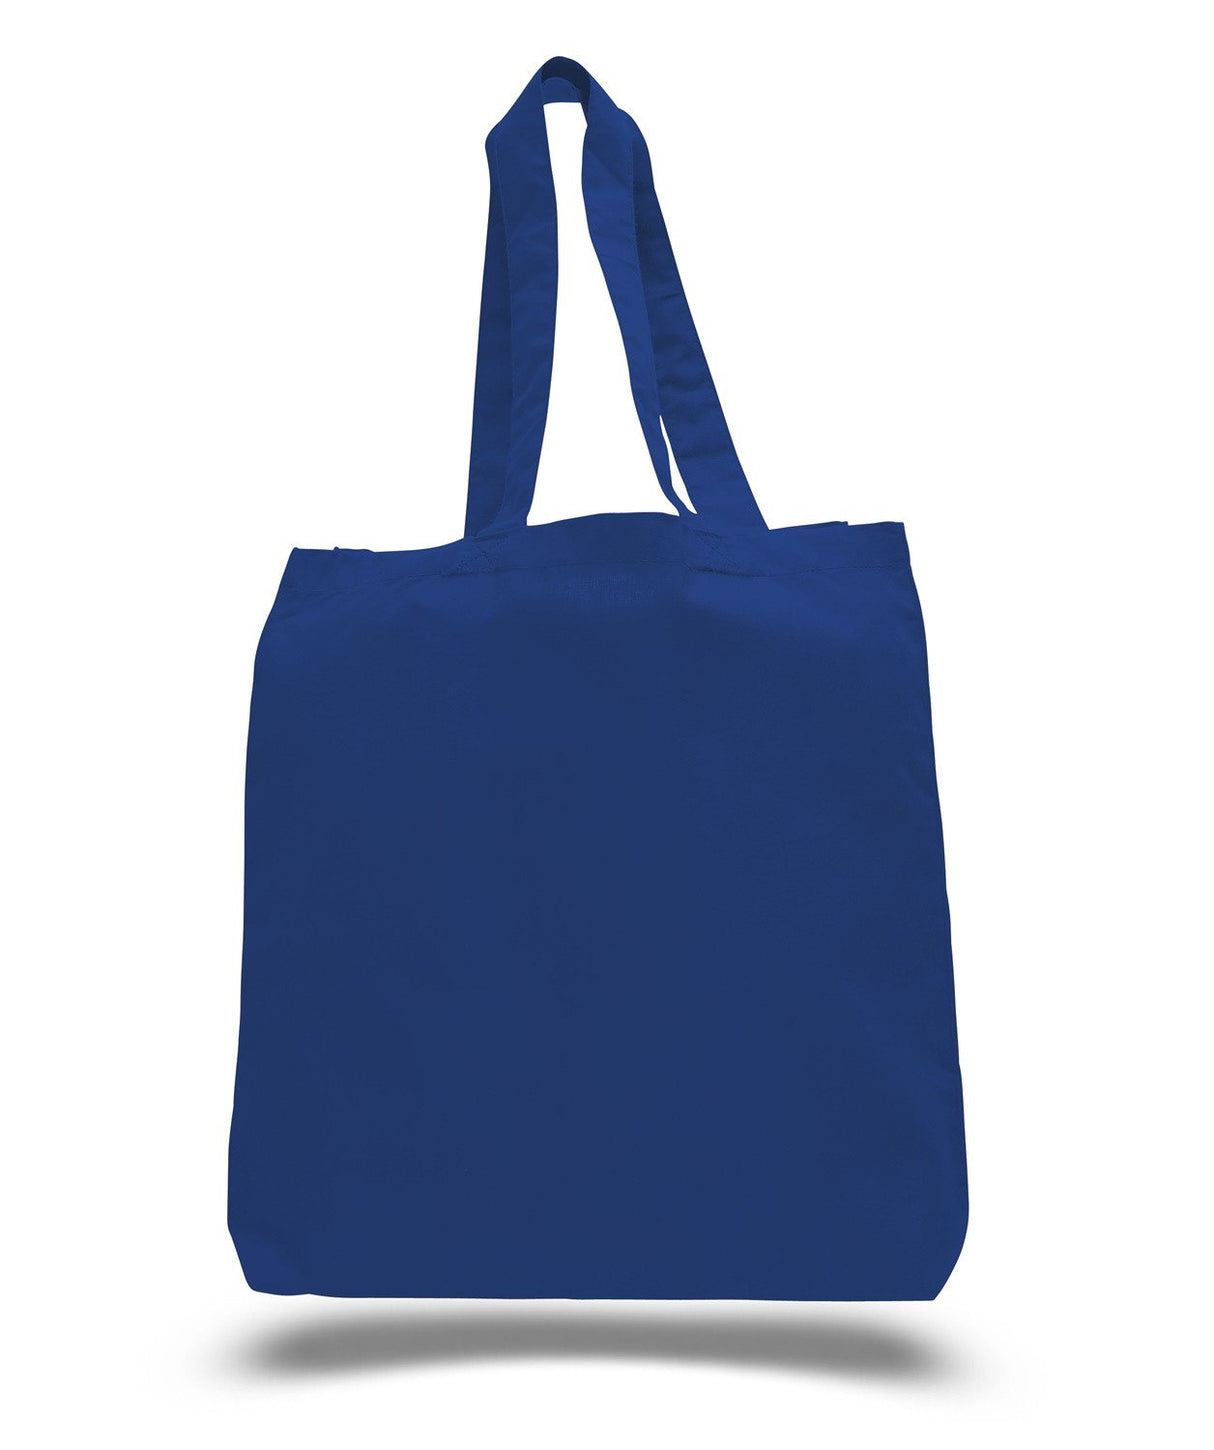 Wholesale Cotton Tote Bags W/Gusset in Royal